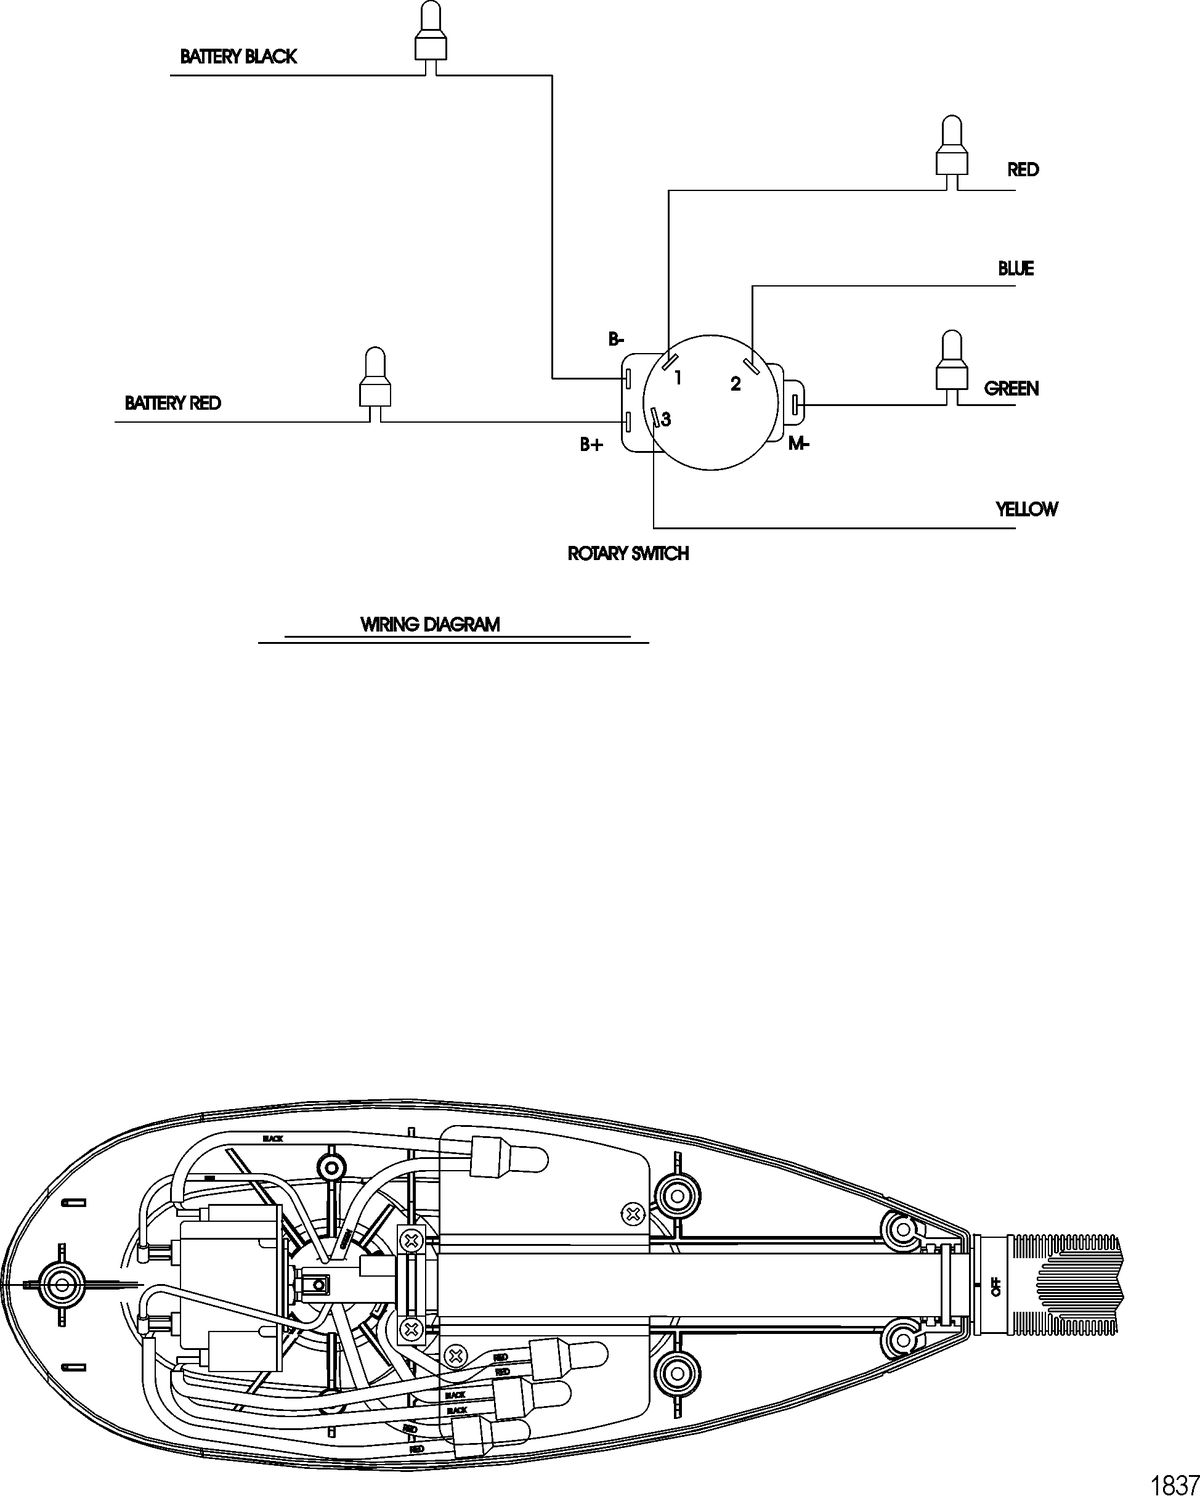 TROLLING MOTOR MOTORGUIDE FRESH WATER SERIES Wire Diagram(Model FW71HB) (Without Quick Connect)